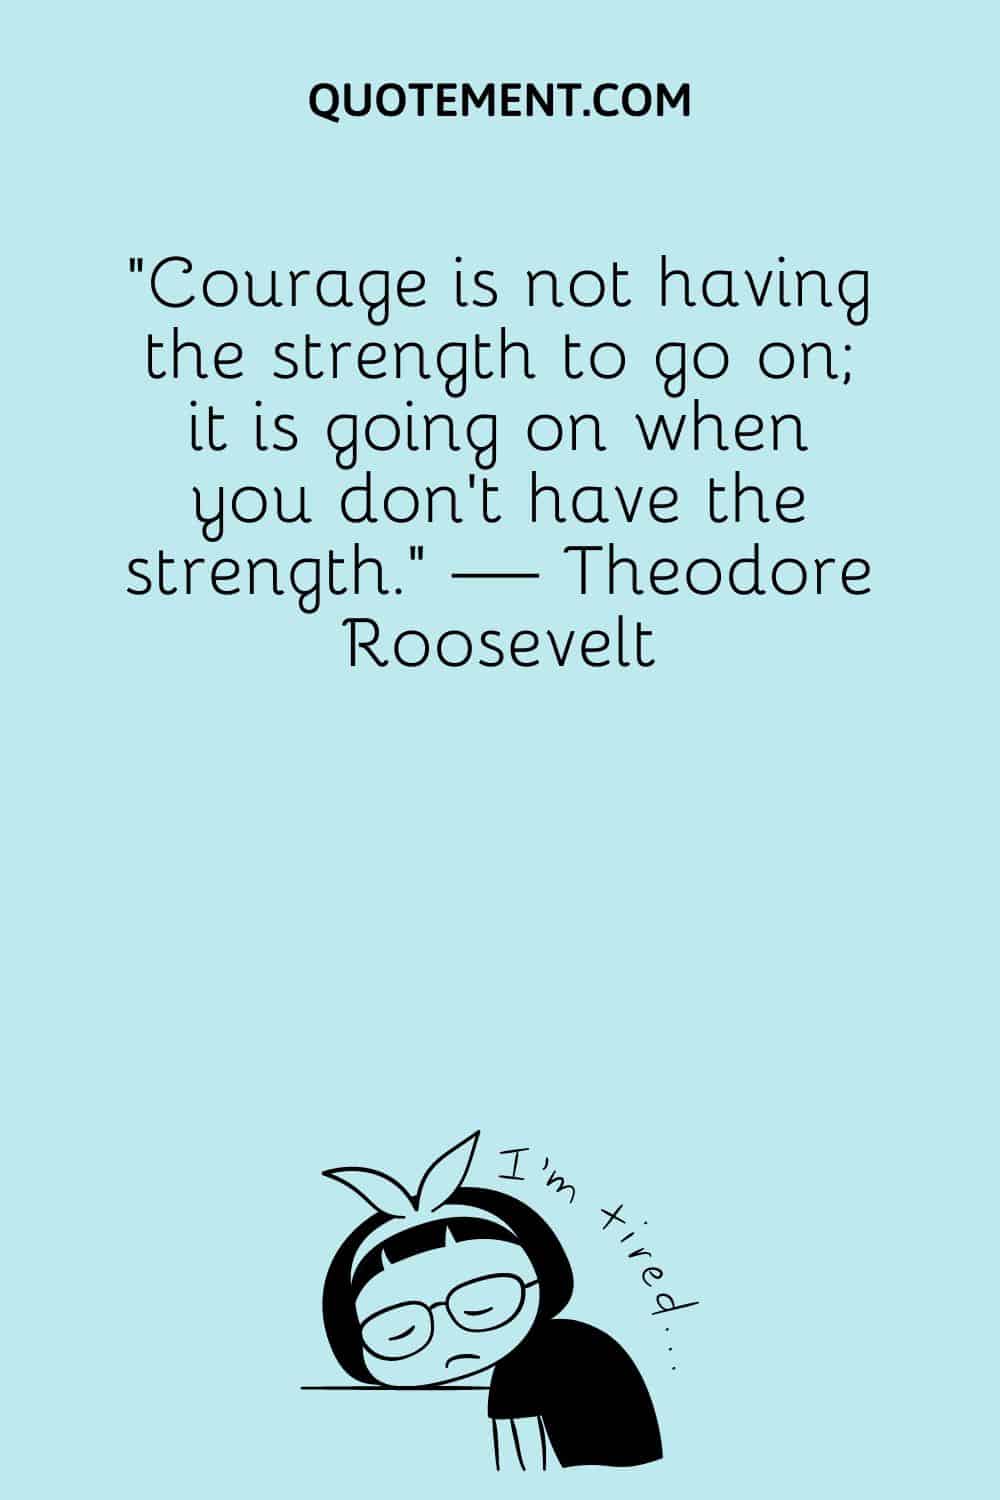 Courage is not having the strength to go on